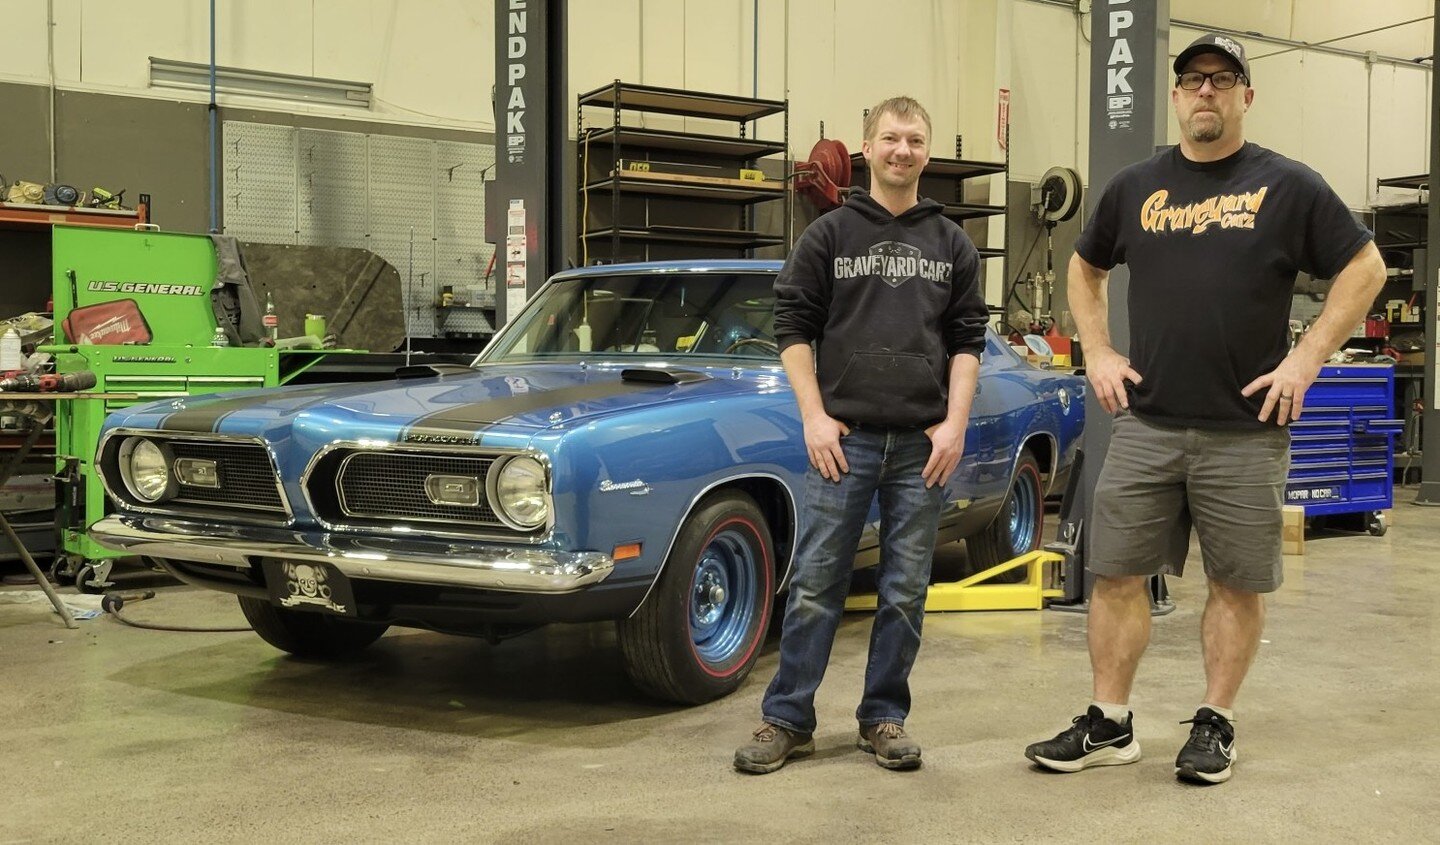 ☠️ Front end Friday, brought to you by Josh and Brian 🚘
#GraveyardCarz #FrontEndFriday #TGIF #MoparOrNoCar @GYC_Mark @OfficialMopar @Autometaldirect @ClassInd @MotorTrendTV